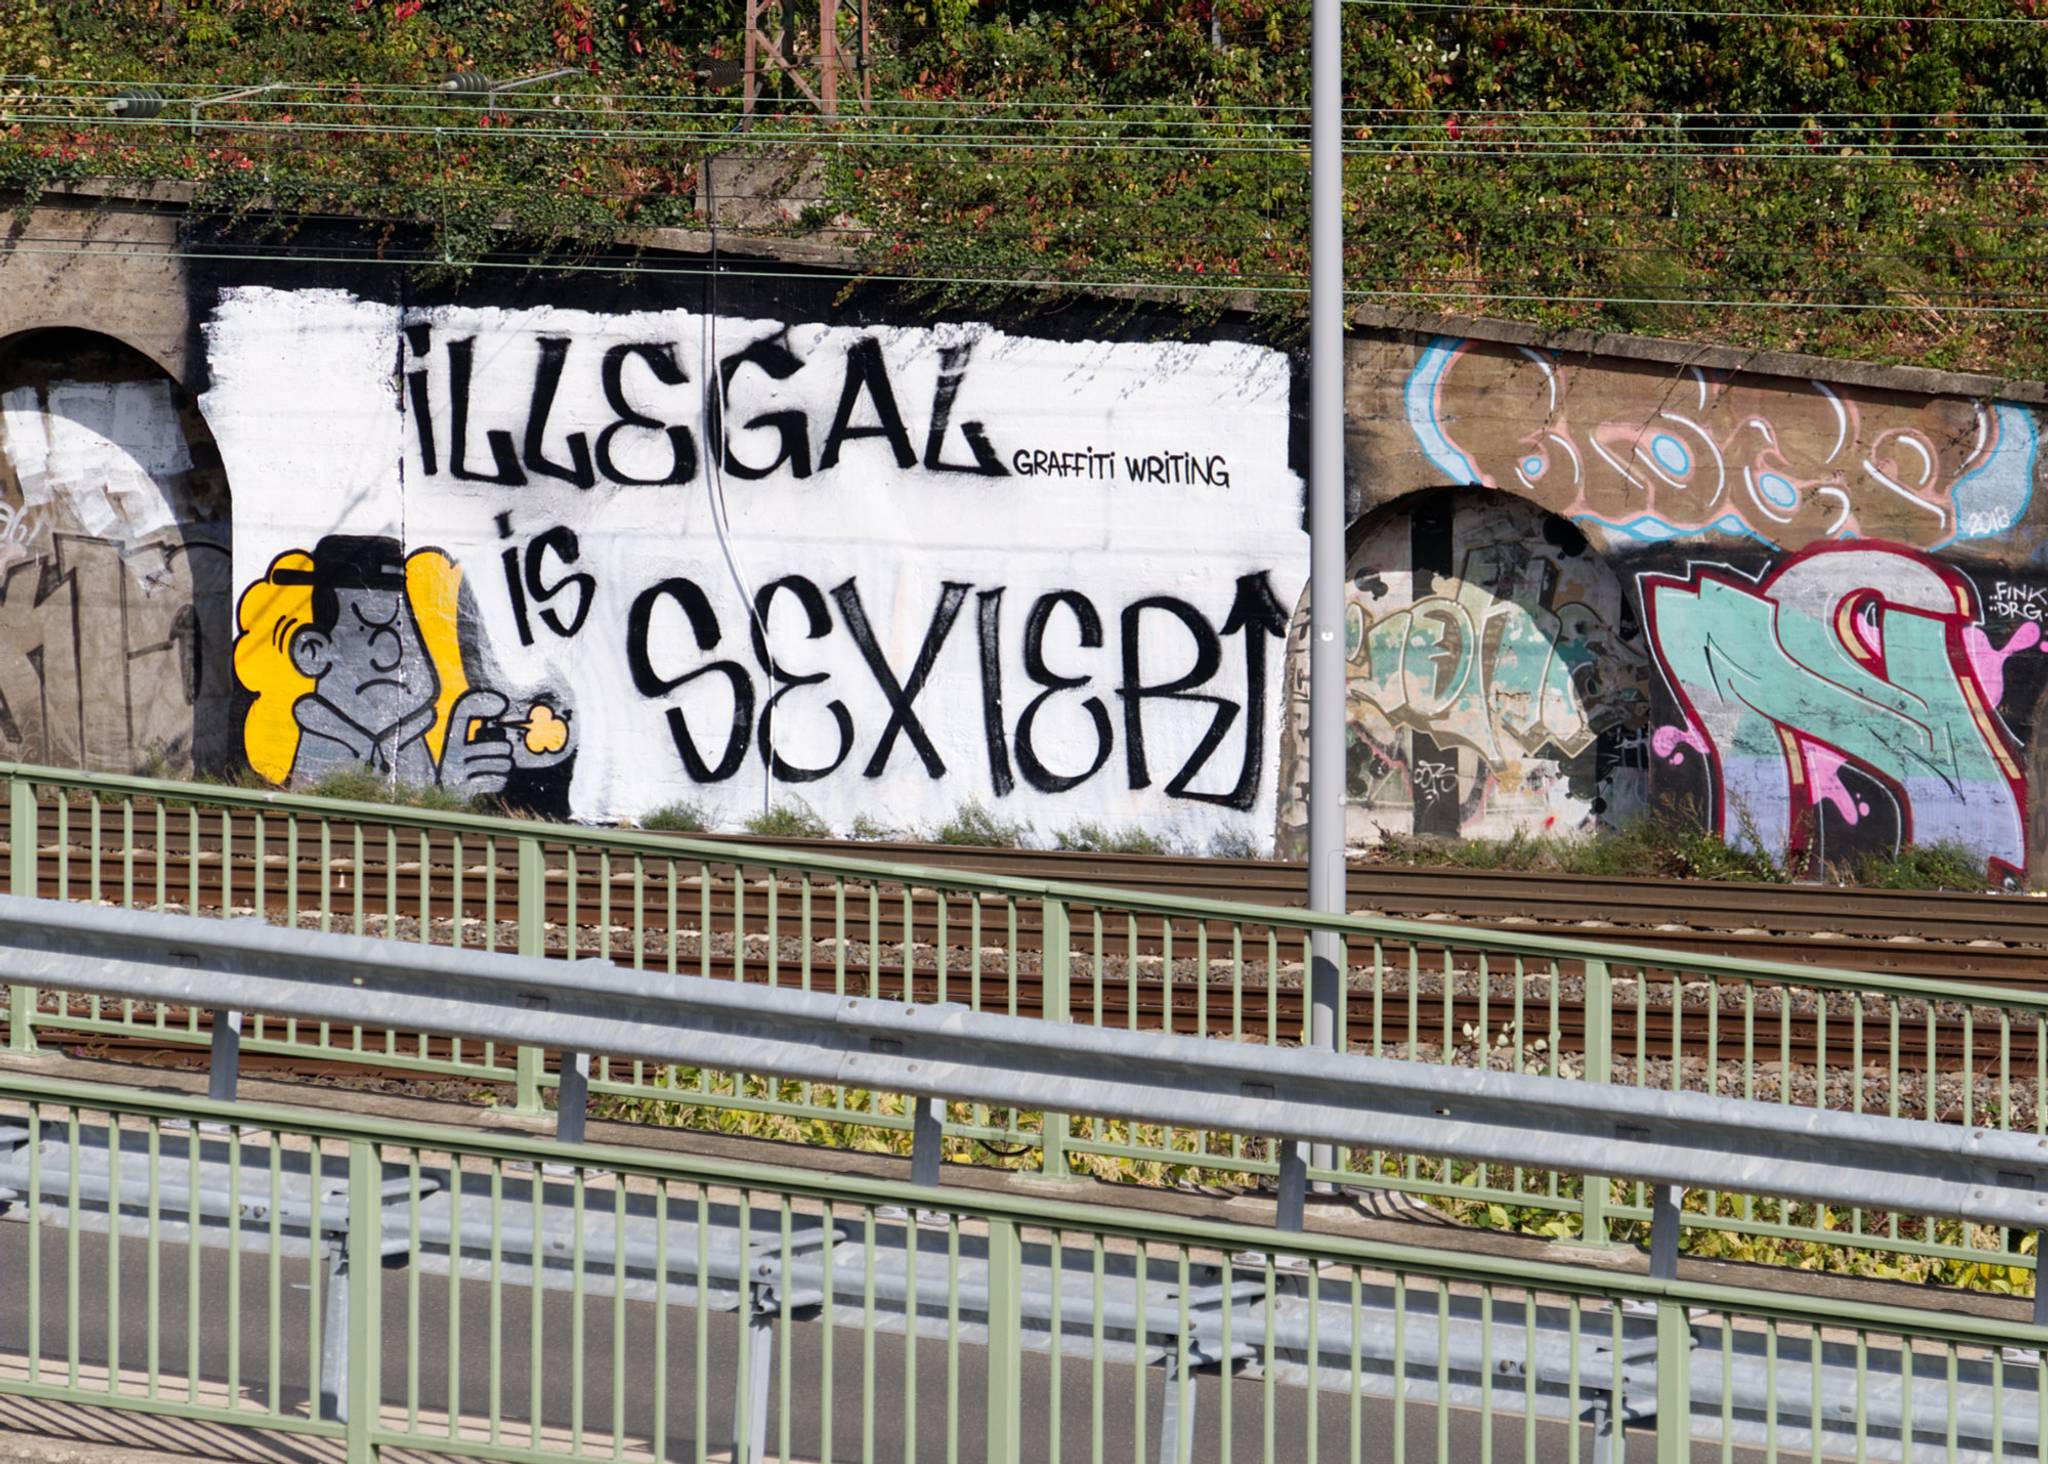 Unknown&mdash;Illegal (graffiti writing) is sexier!